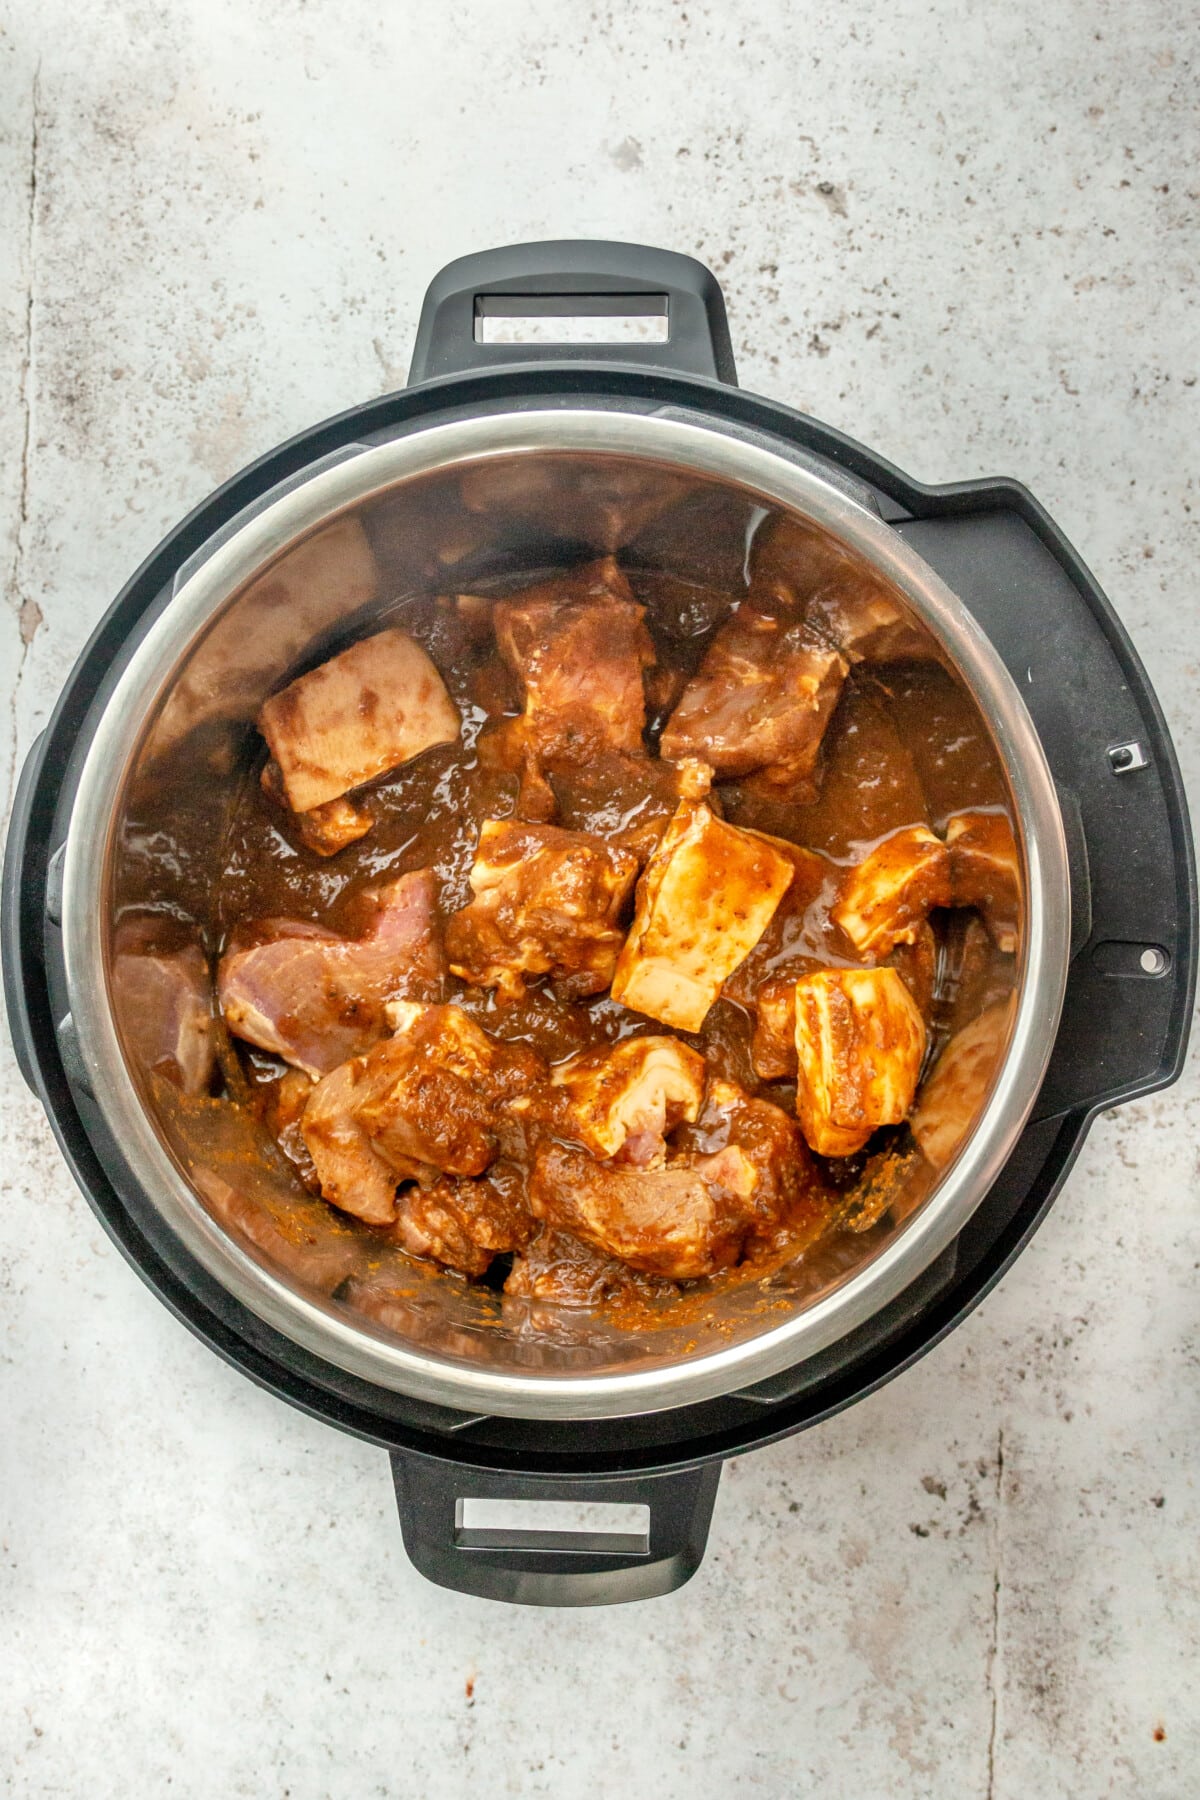 Chunks of marinated pork shoulder sit in an instant pot on a light grey surface.